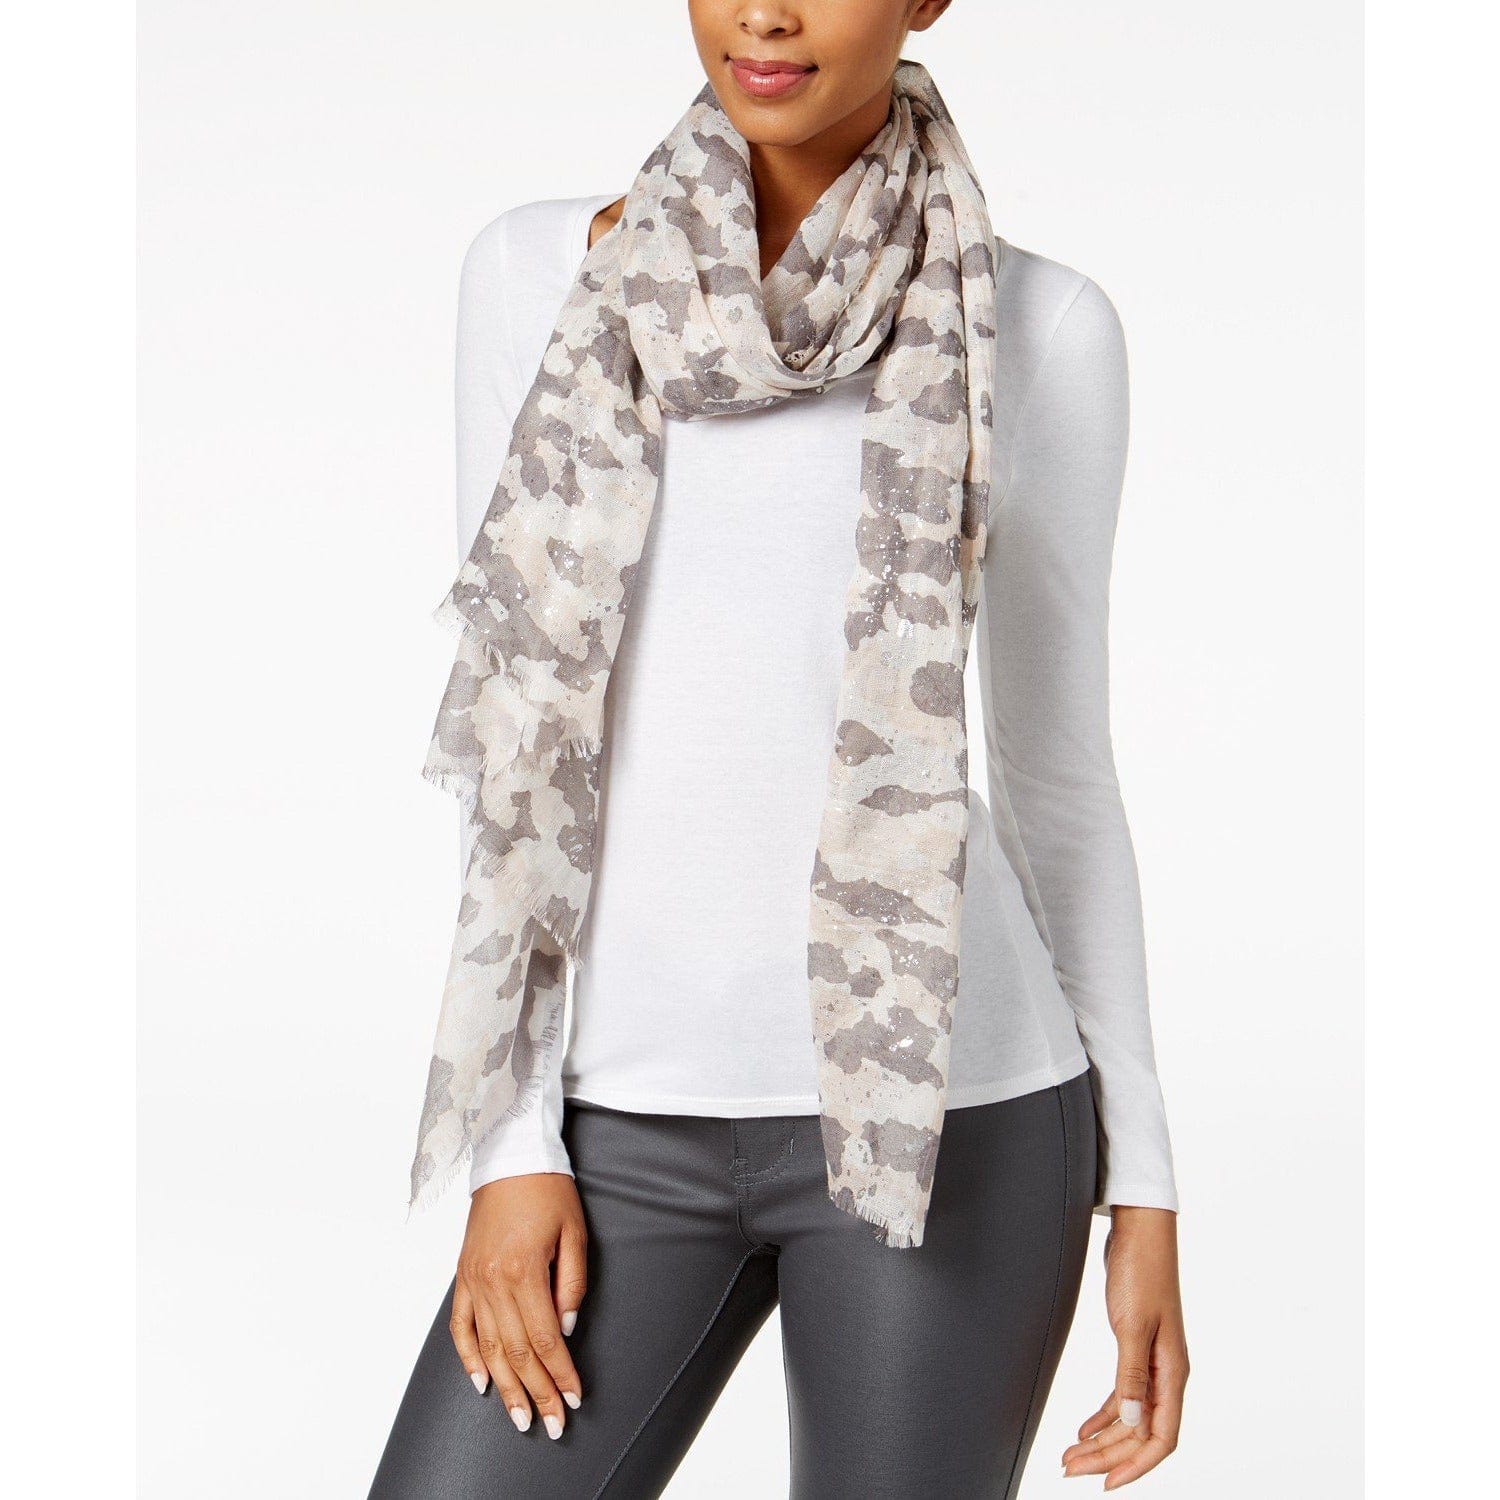 Steve Madden Twinkle Camo Wrap & Scarf - The Pink Pigs, A Compassionate Boutique